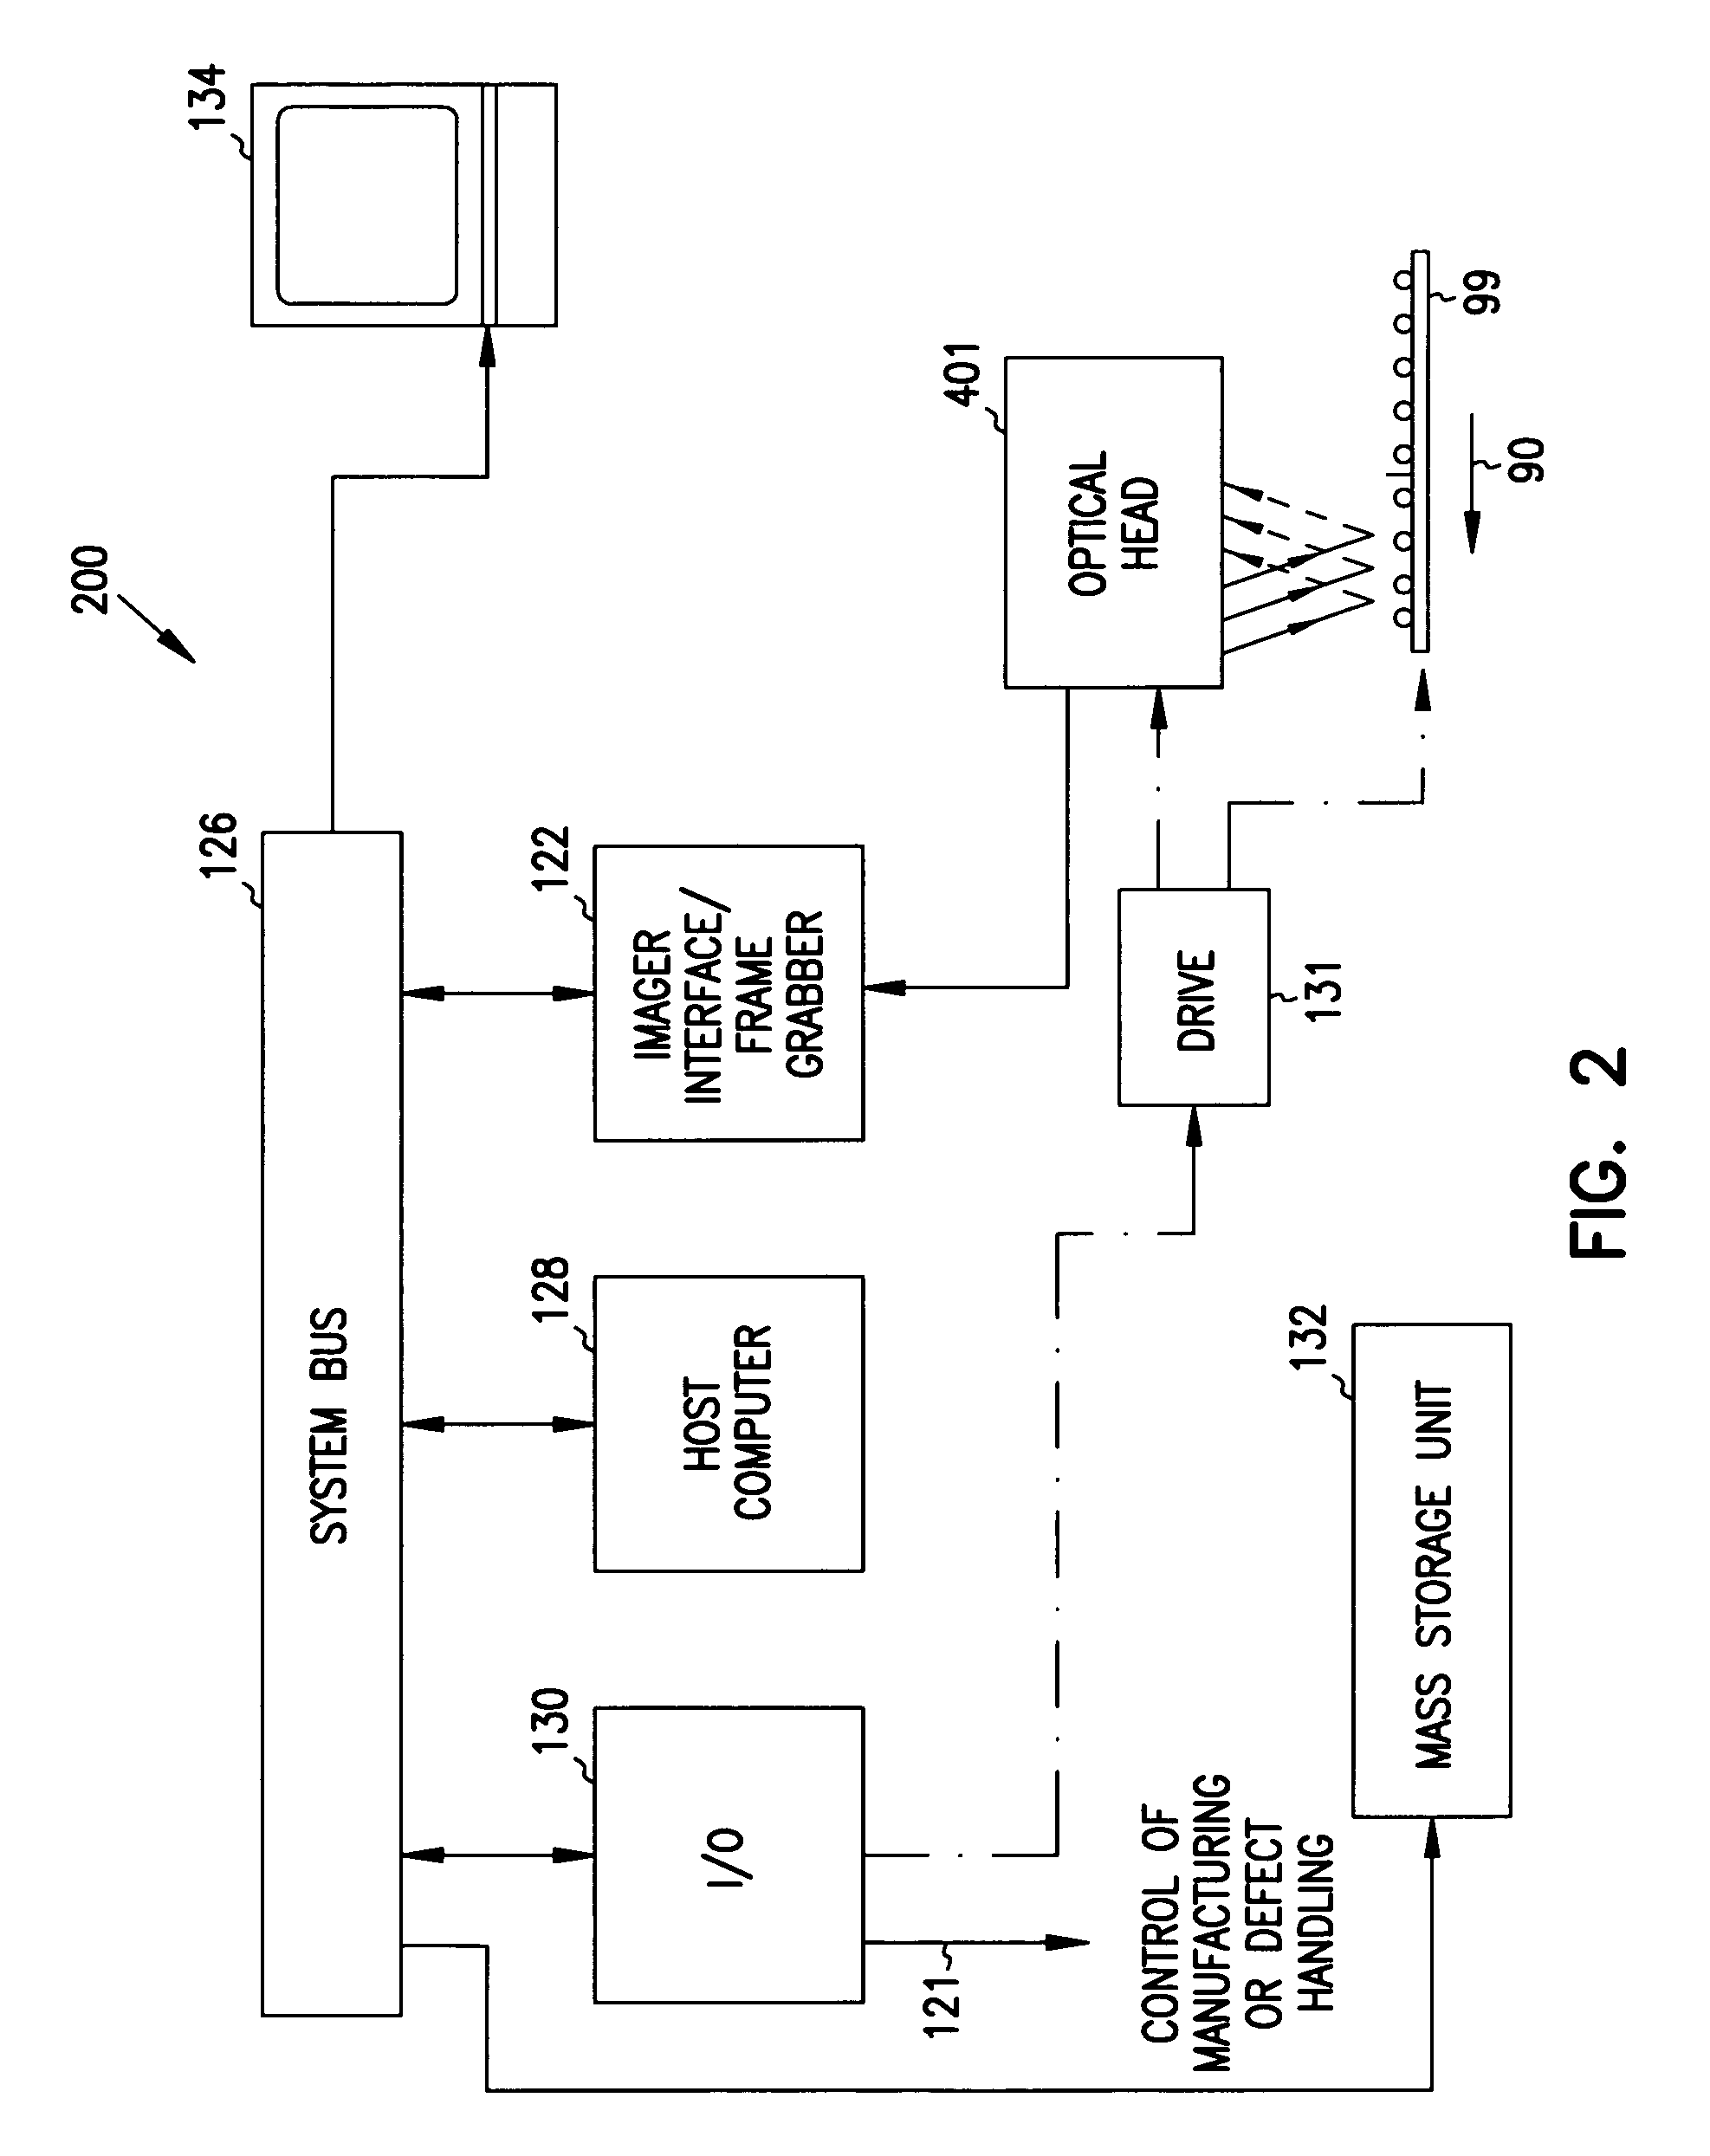 Tray flipper and method for parts inspection